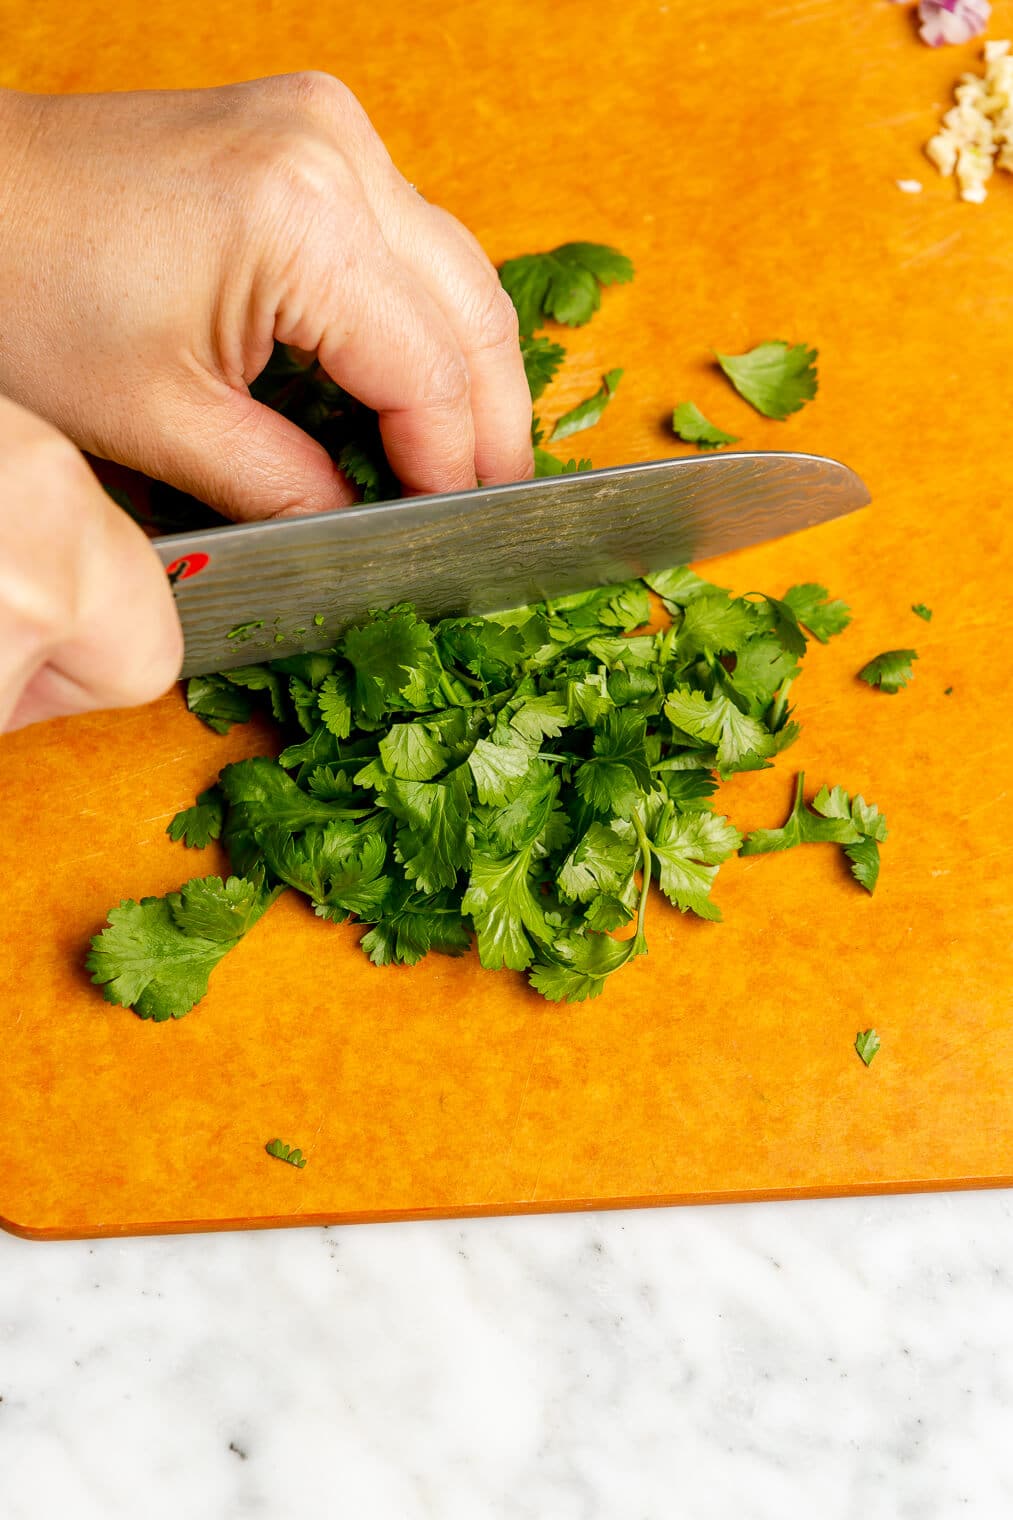 A person roughly chopping cilantro with a chef's knife on an orange cutting board.